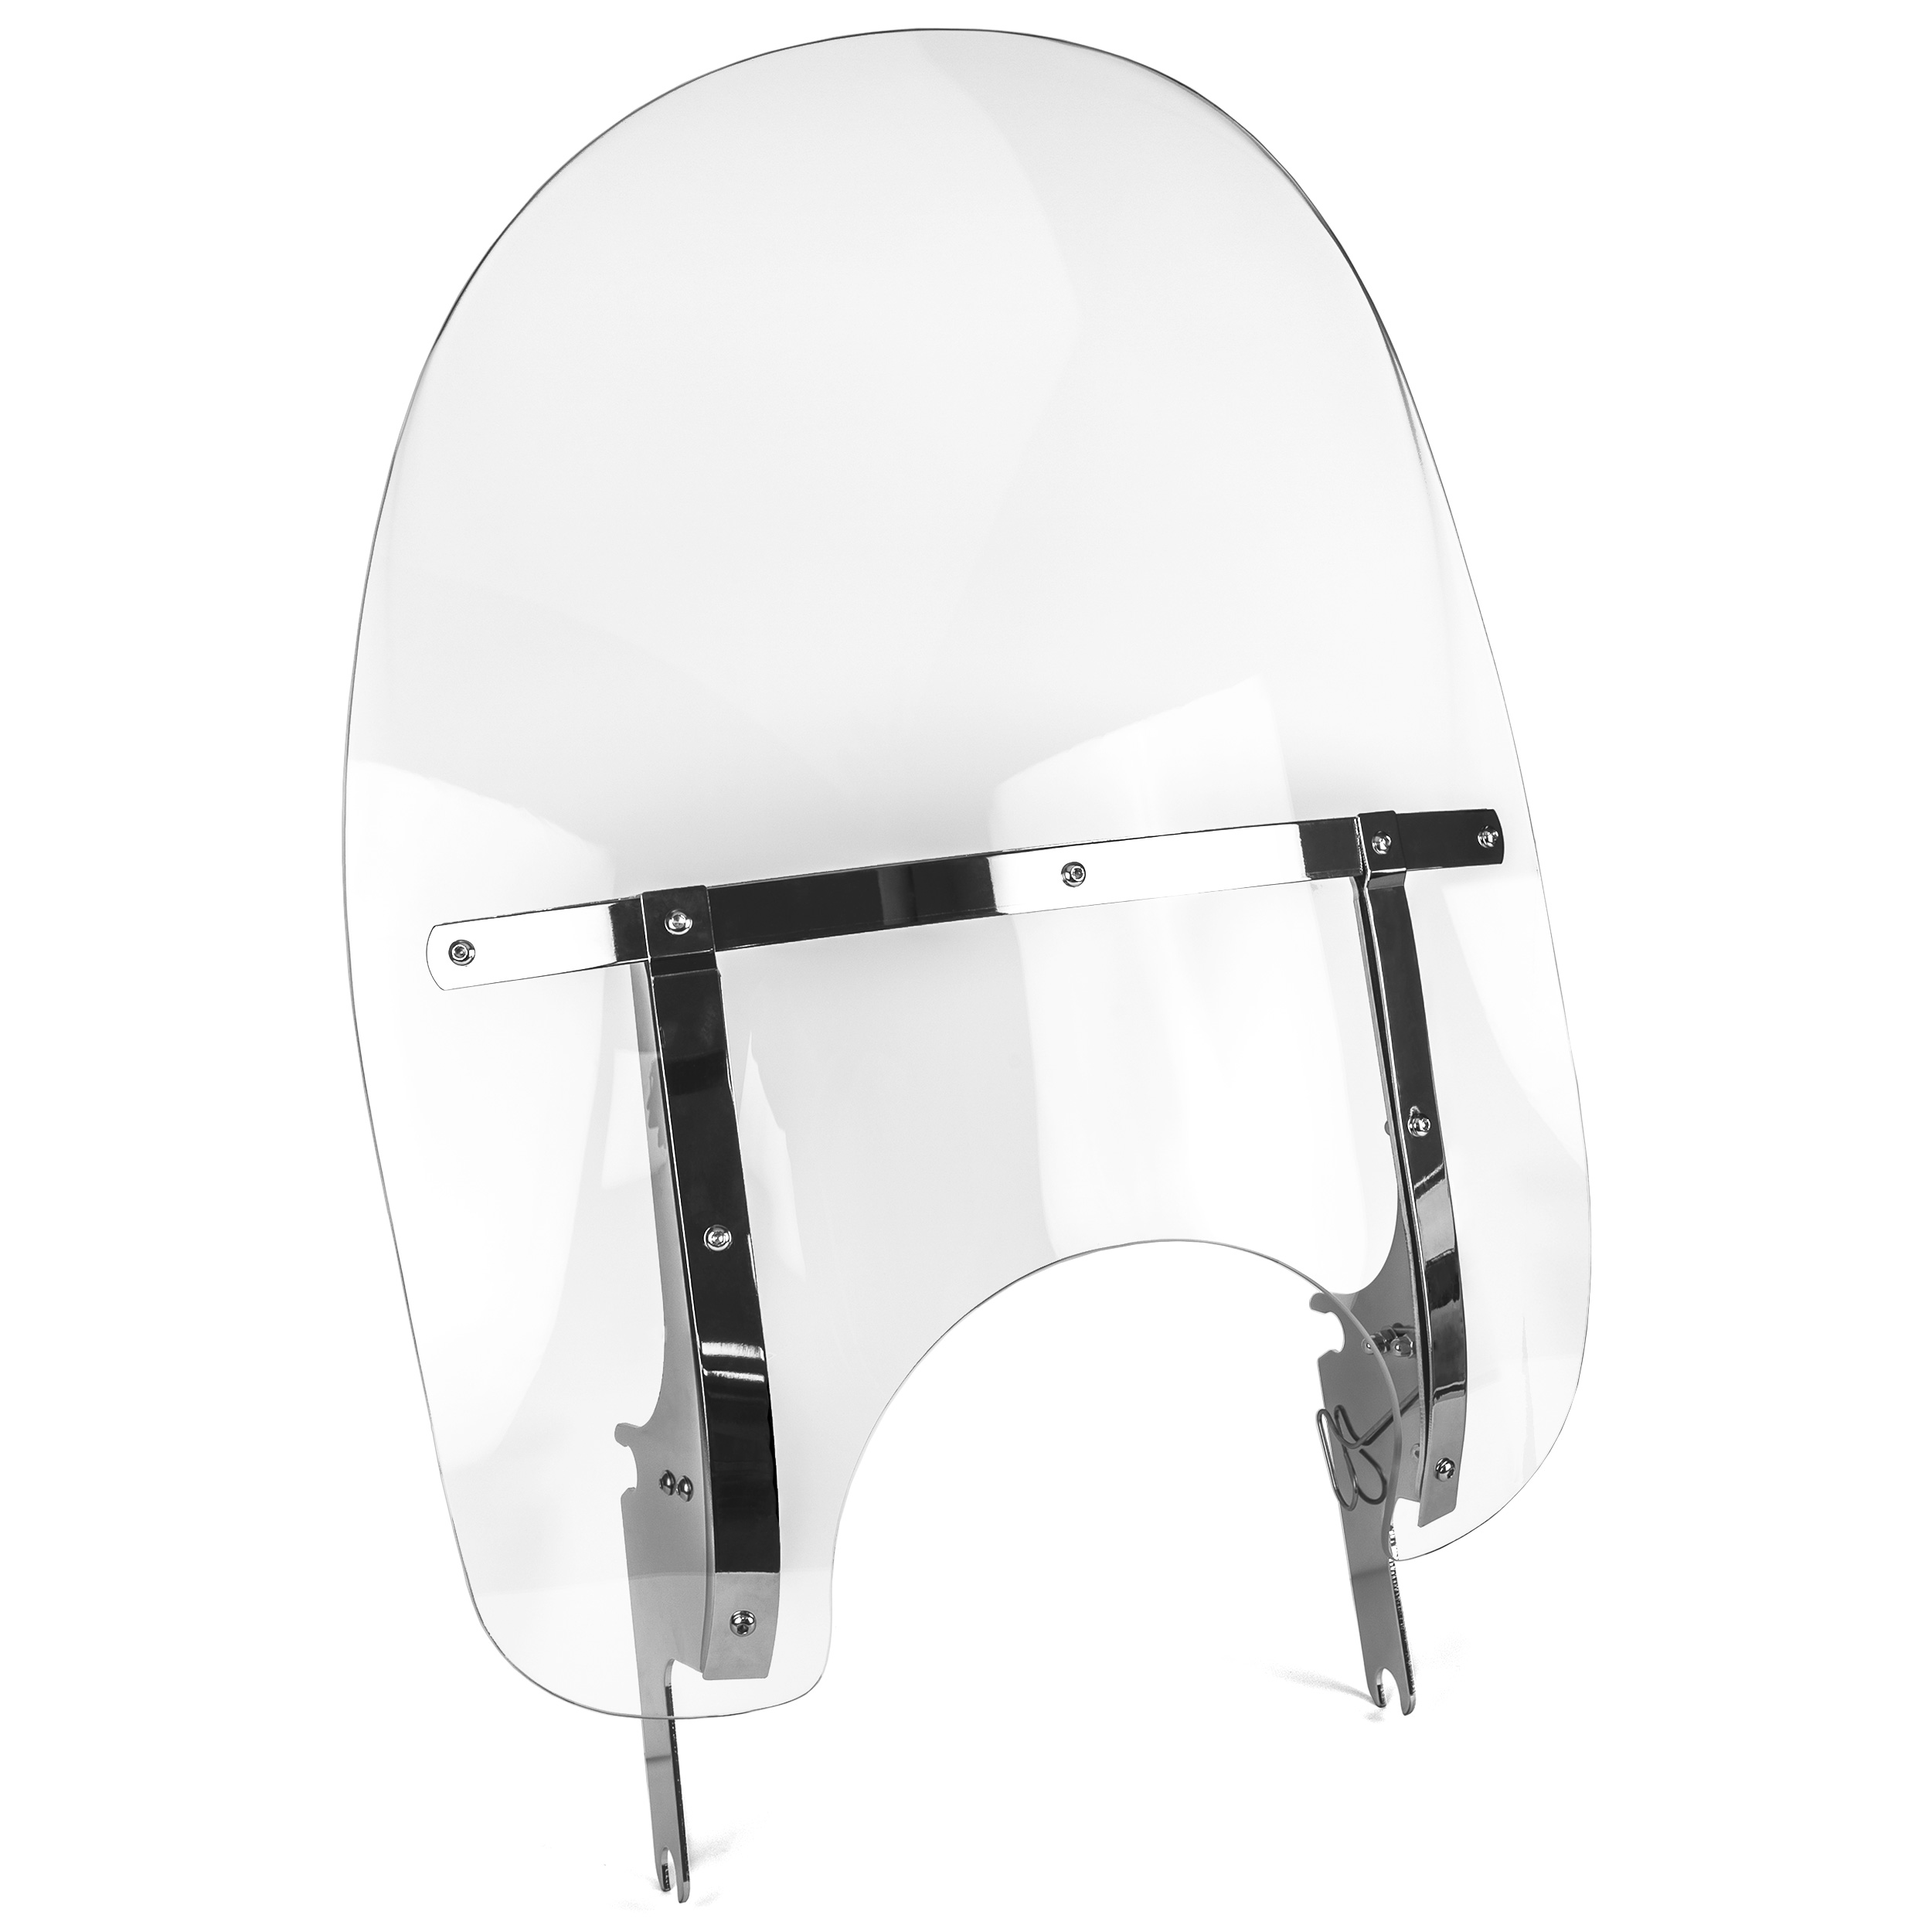 Krator Detachable Quick-Release Windshield Windscreen, Clear, Compatible with 2003-2008 Harley Davidson Road King Screamin Eagle